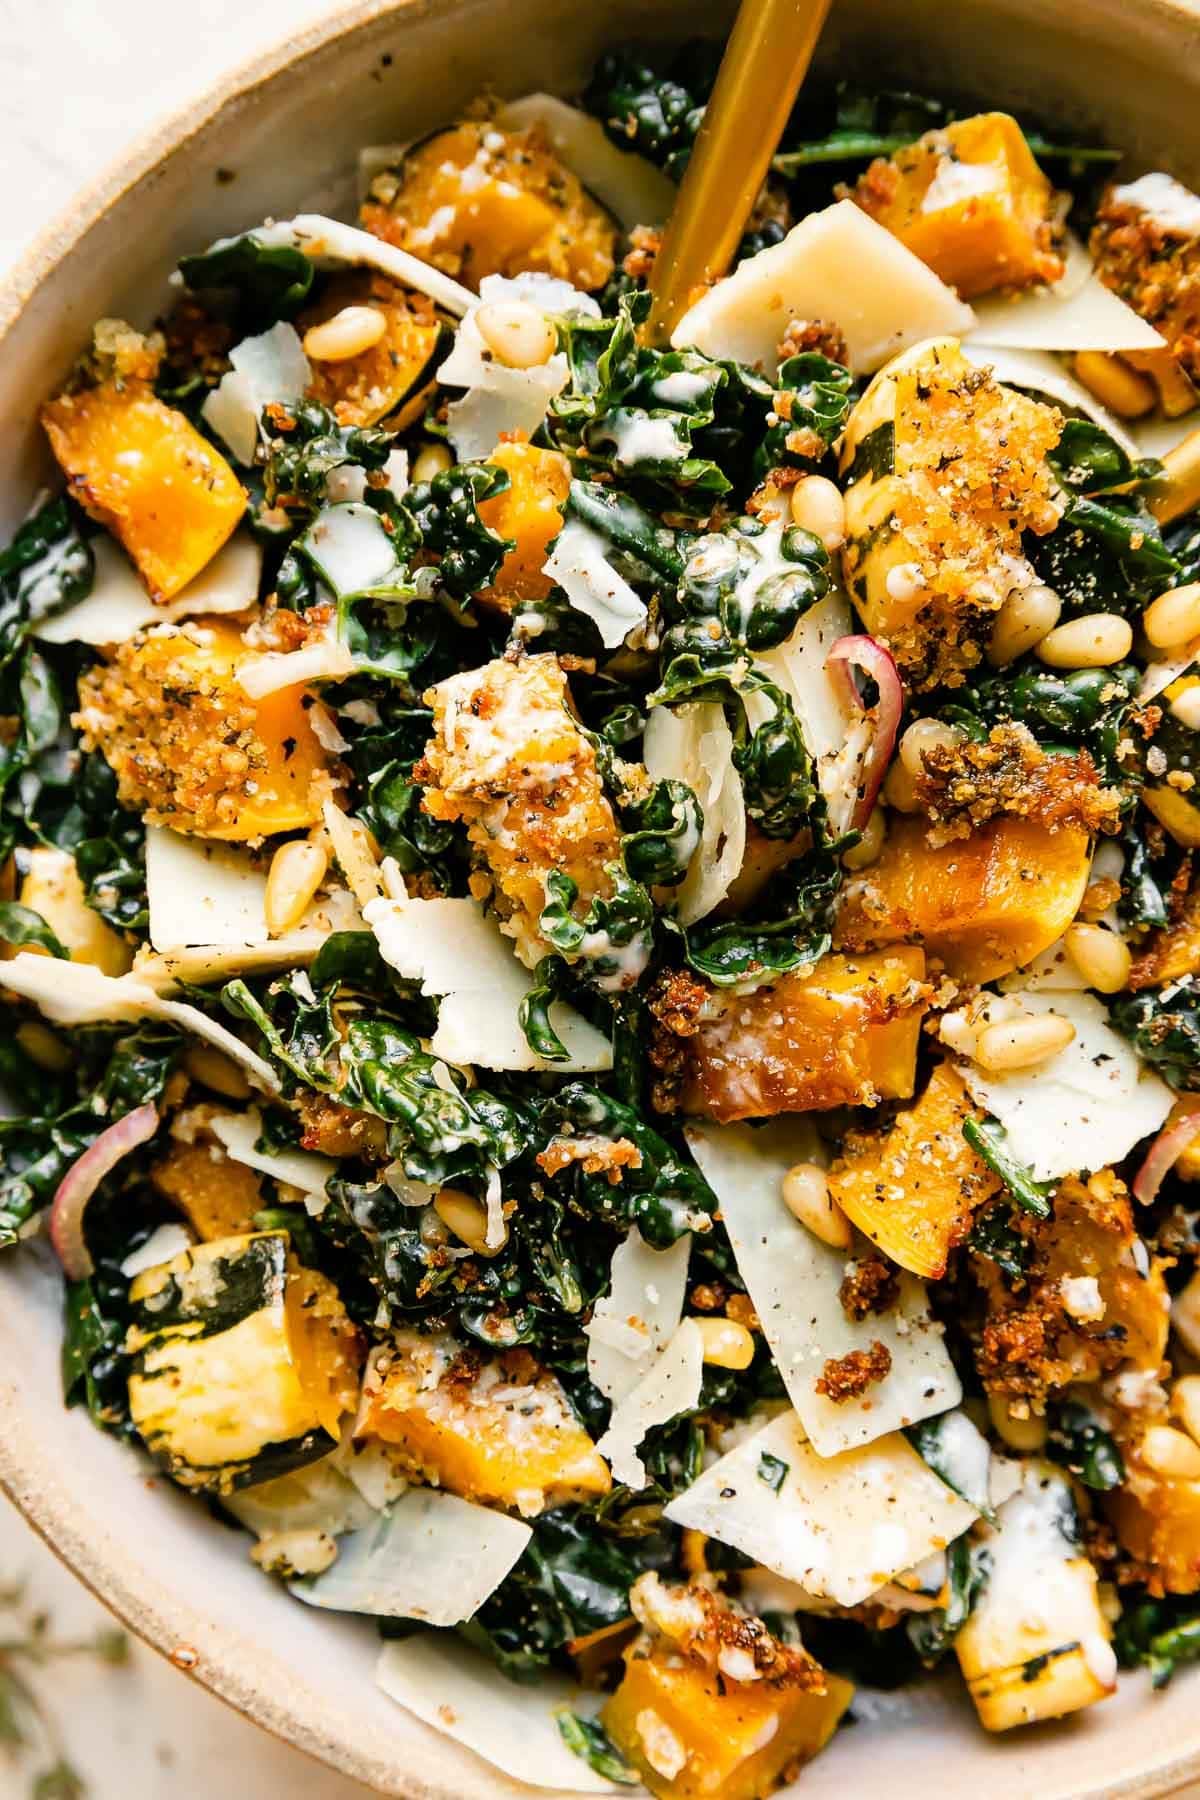 Bowl of Autumn Caesar Salad with Roasted Delicata Squash Croutons